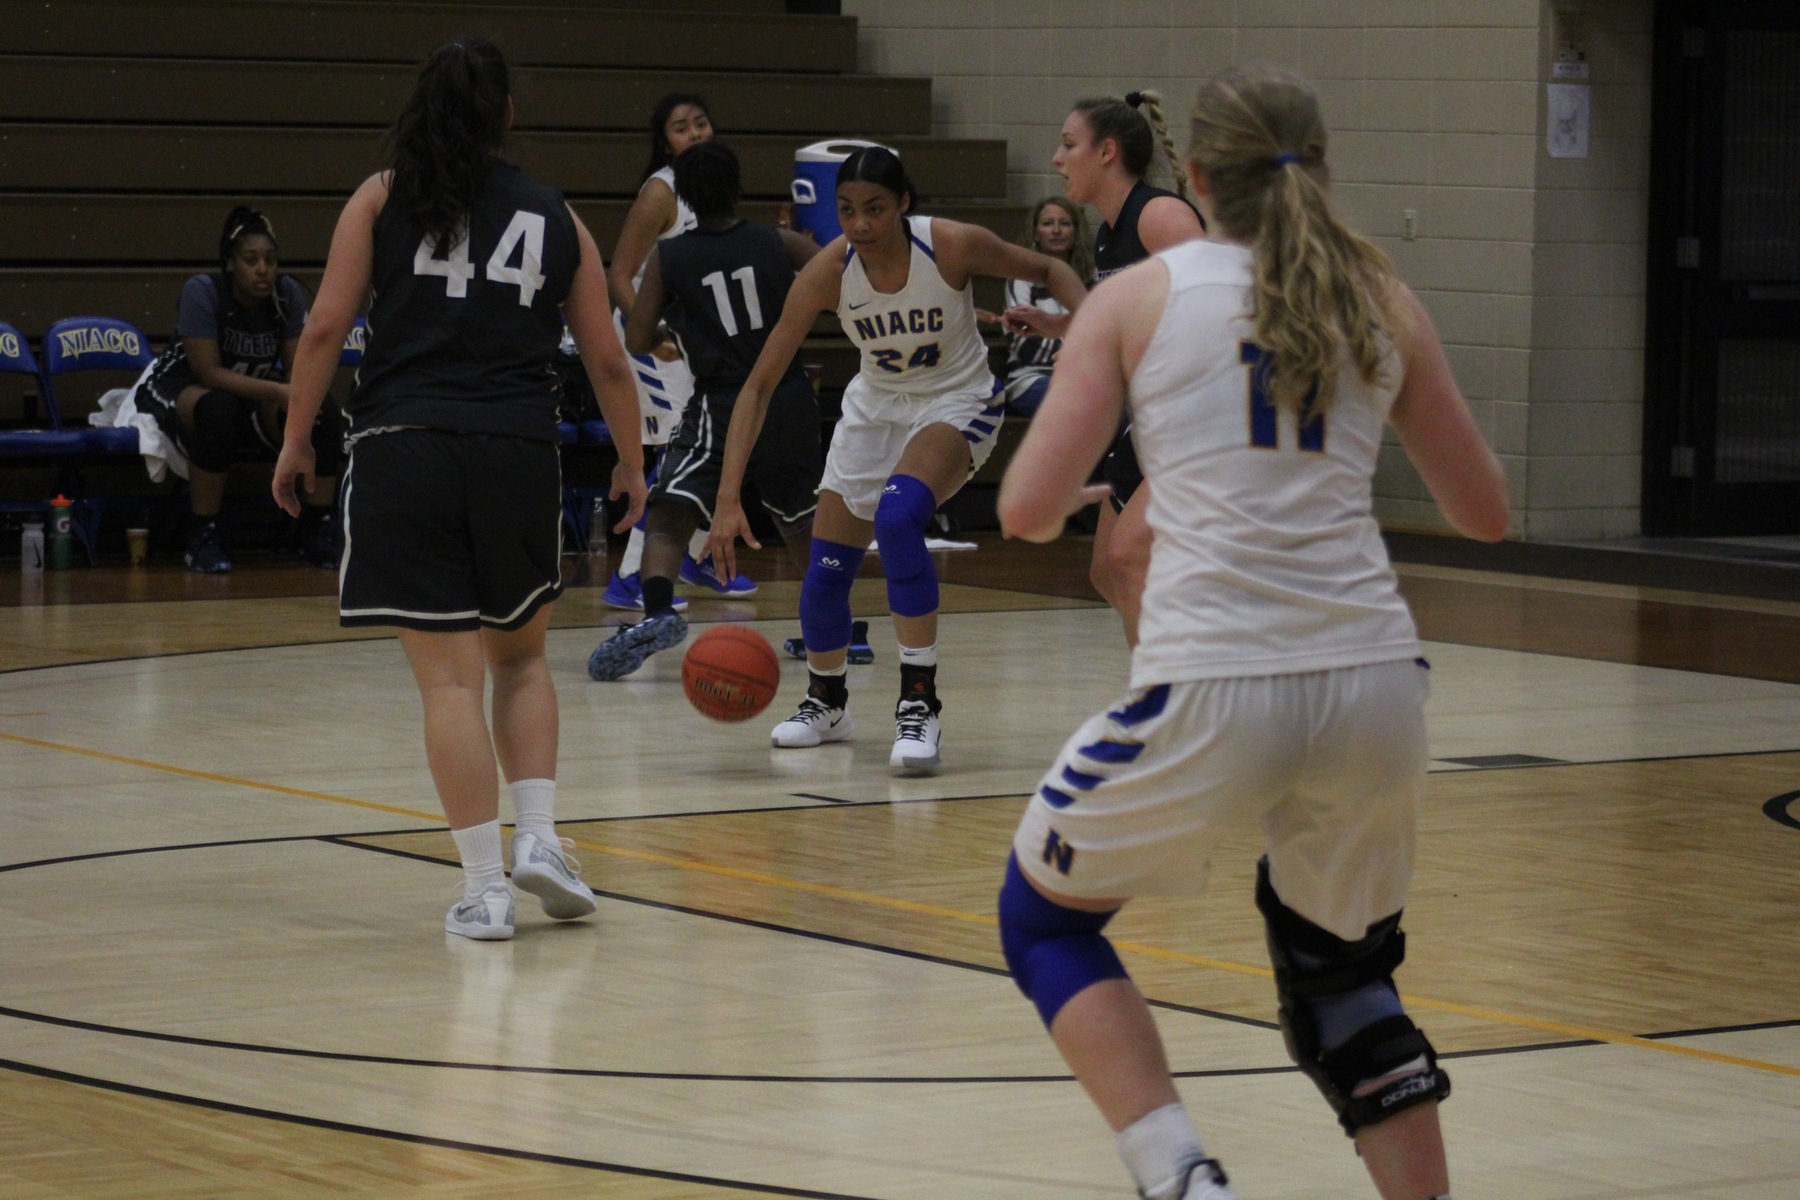 Sierra Morrow drives to the basket in Saturday's game against Marshalltown CC at the Konigsmark Klassic.